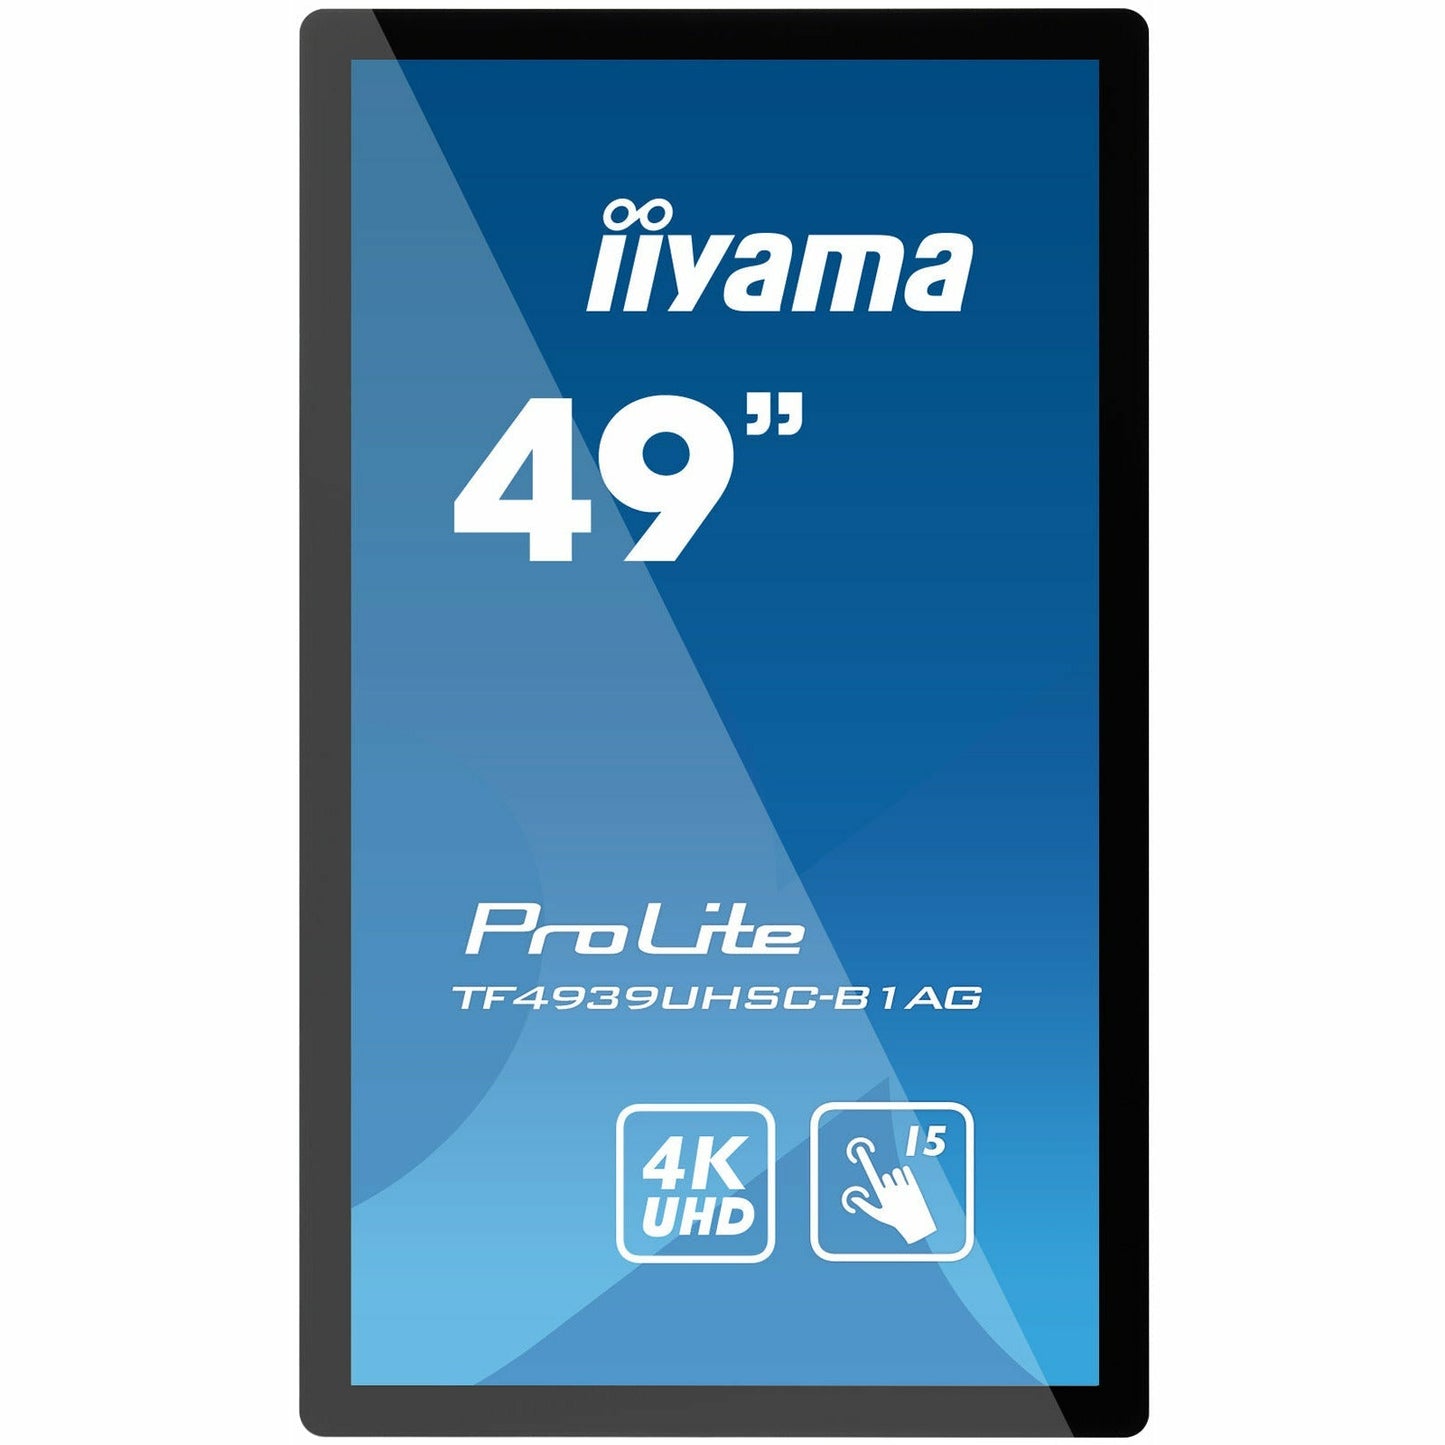 Steel Blue iiyama ProLite TF4939UHSC-B1AG 49" Open Frame IPS 15pt PCAP IPS 4K Touch Screen with Anti Glare